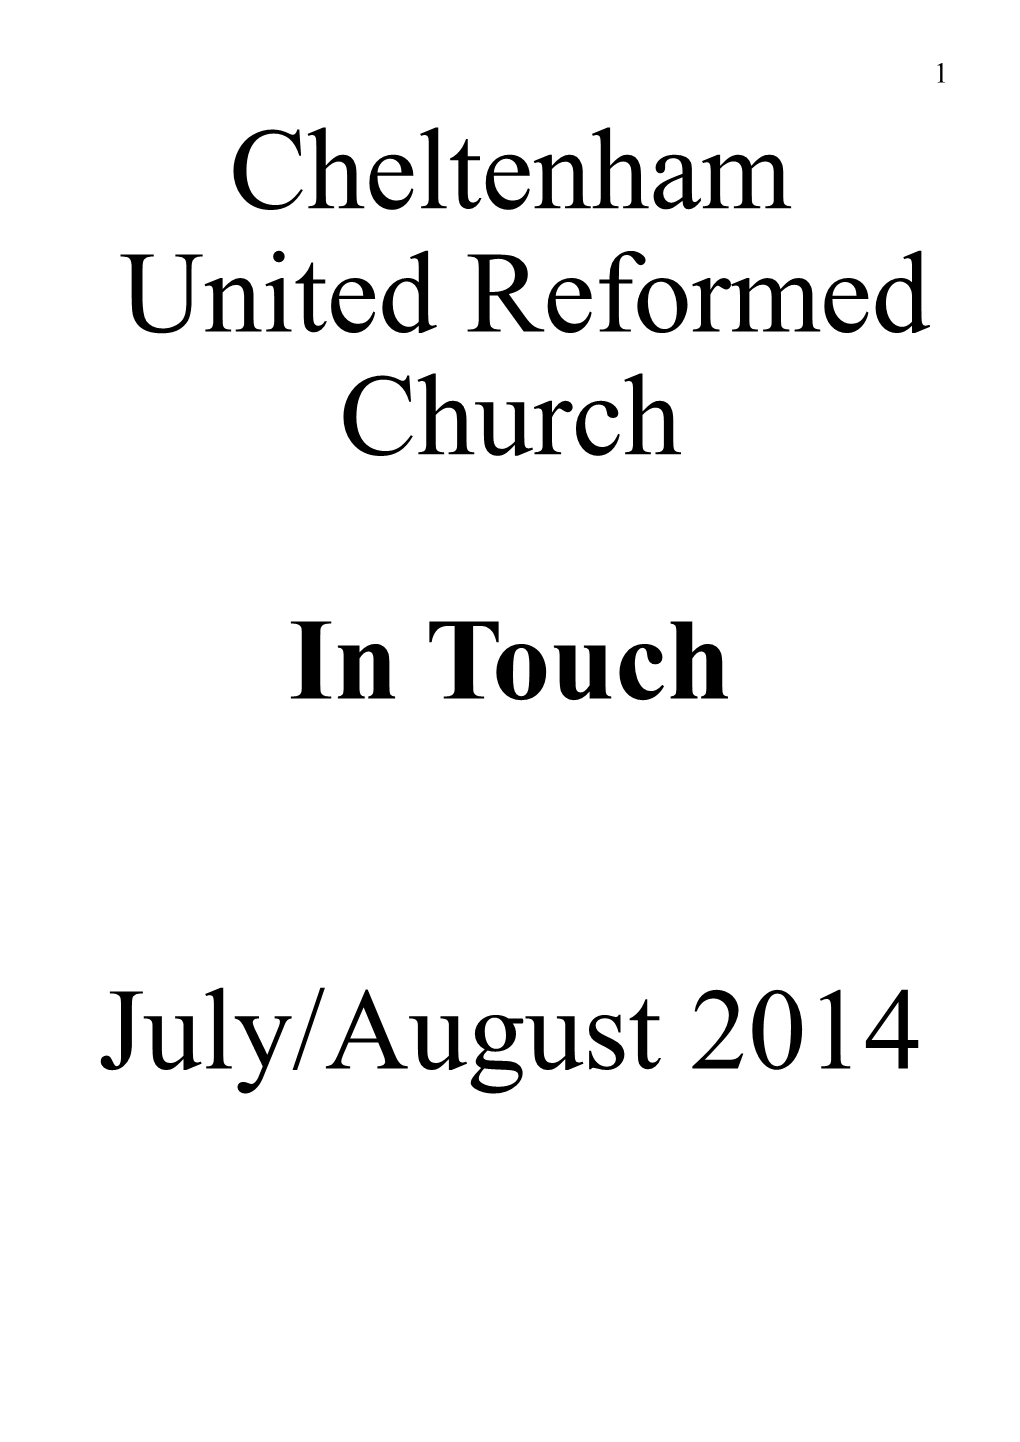 Cheltenham United Reformed Church in Touch July/August 2014